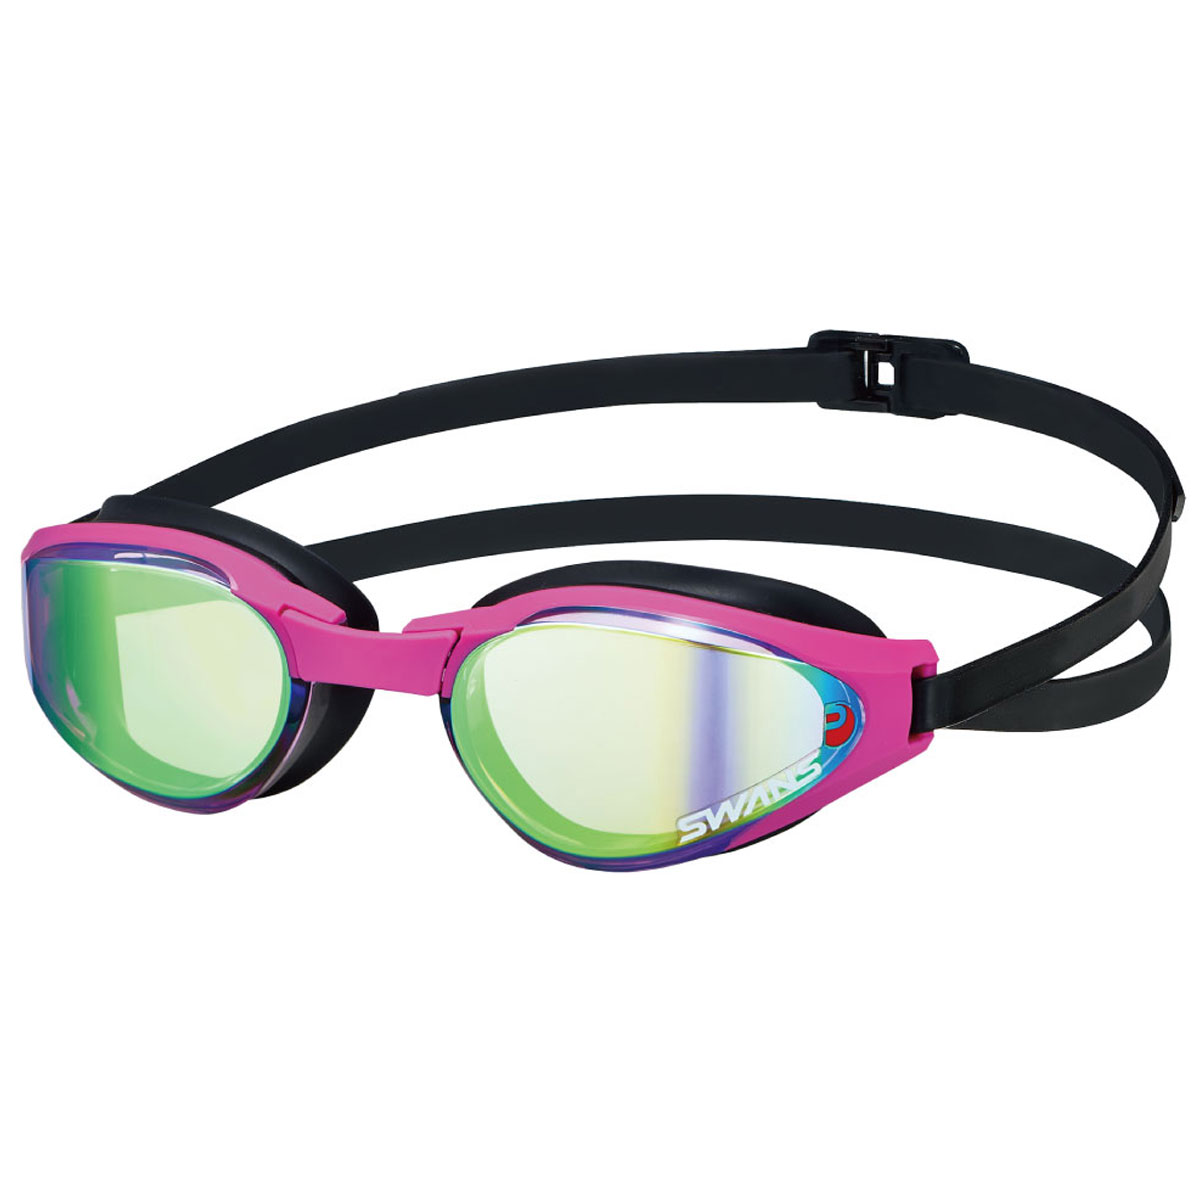 Swans SR81 Ascender Mirrored Goggles - Pink / Yellow